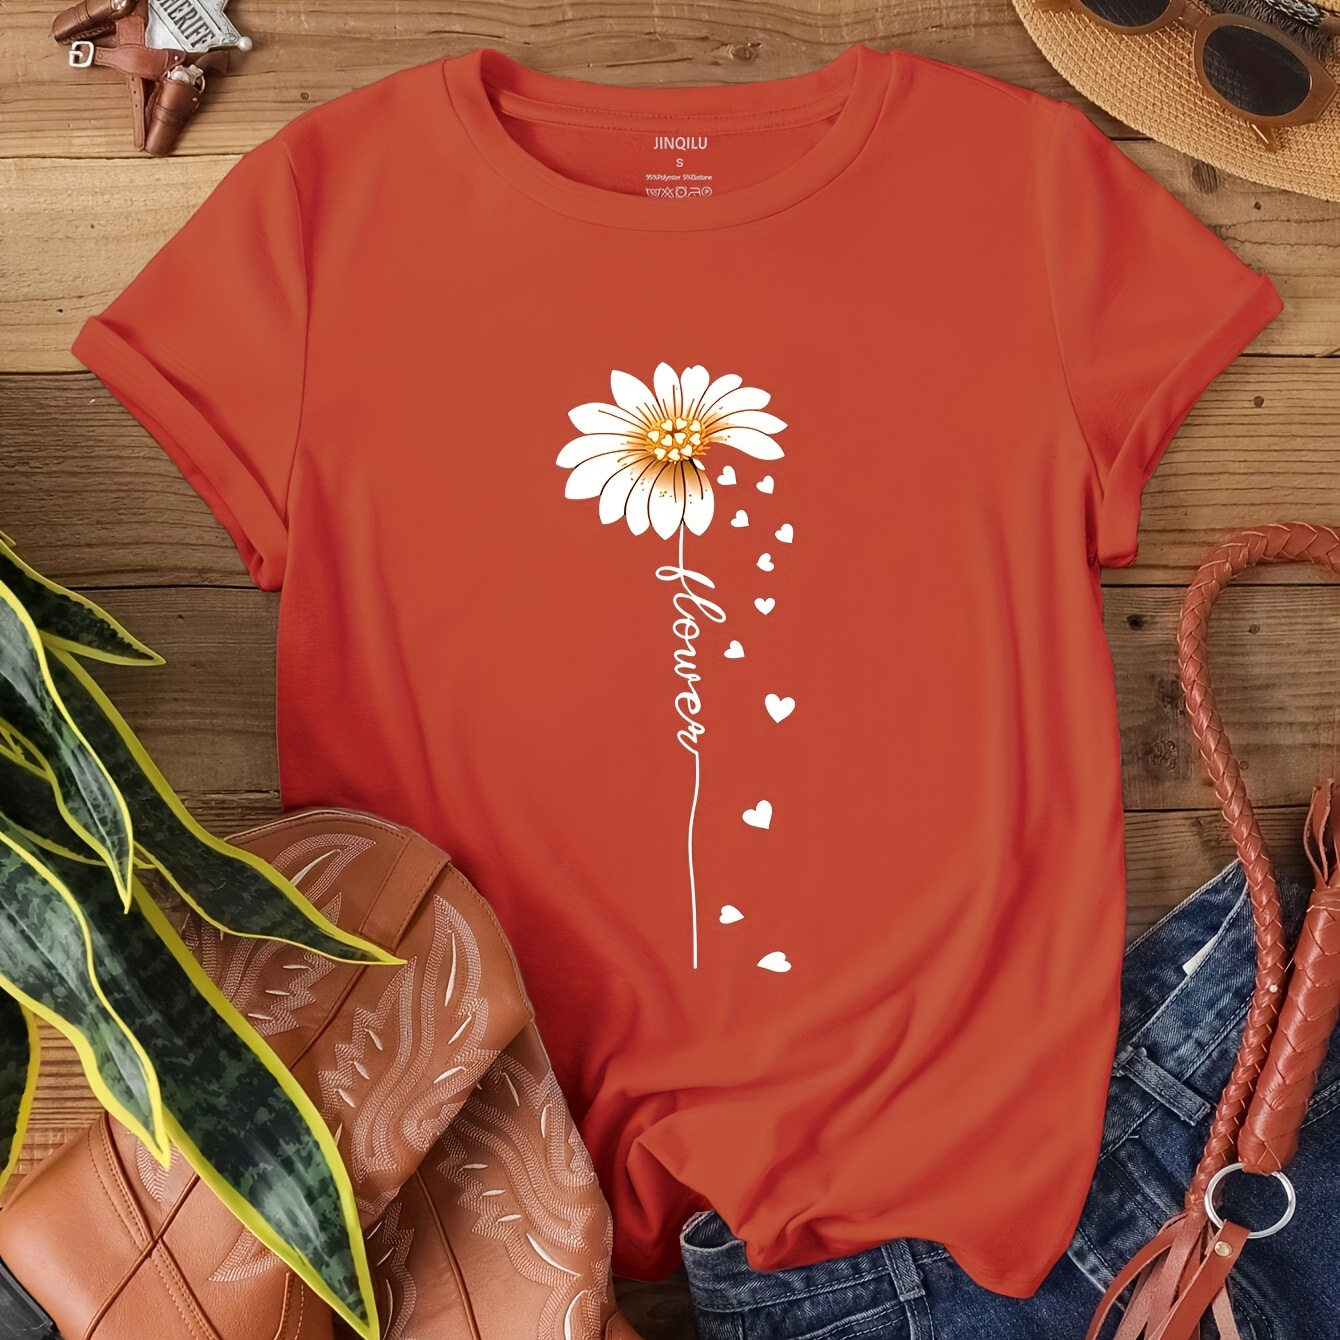 

Faith Letter & Flower Print T-shirt, Casual Short Sleeve Crew Neck Top, Women's Clothing, Valentine's Day